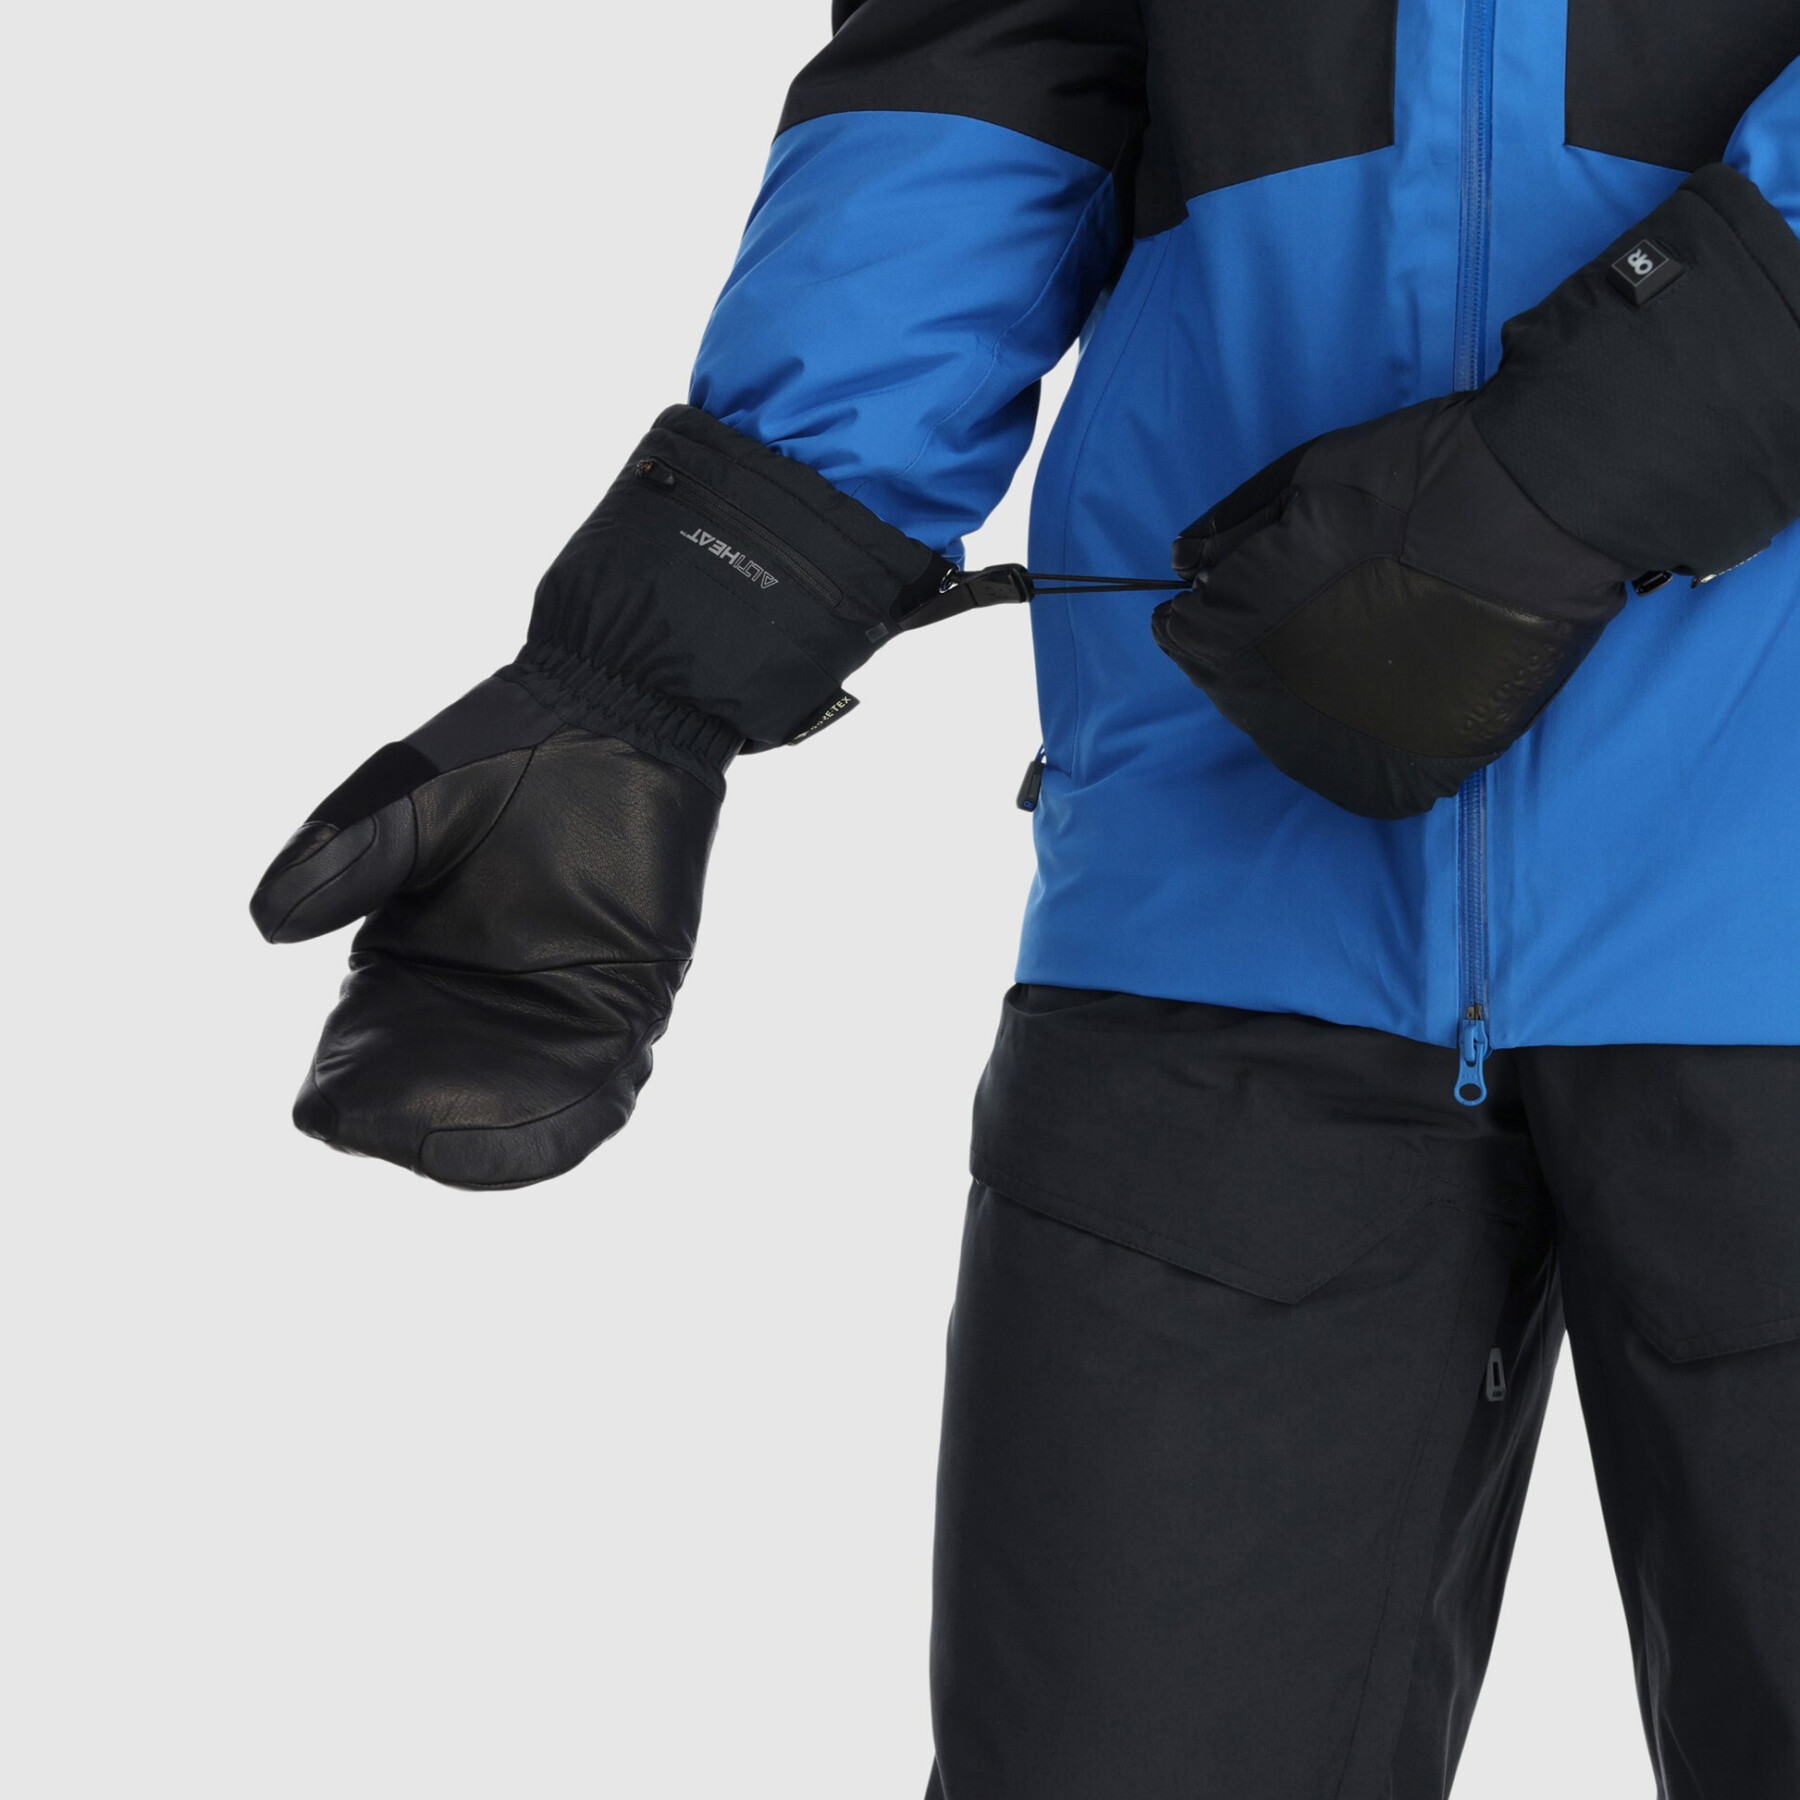 Mitaines chauffants Outdoor Research Prevail Gore-Tex